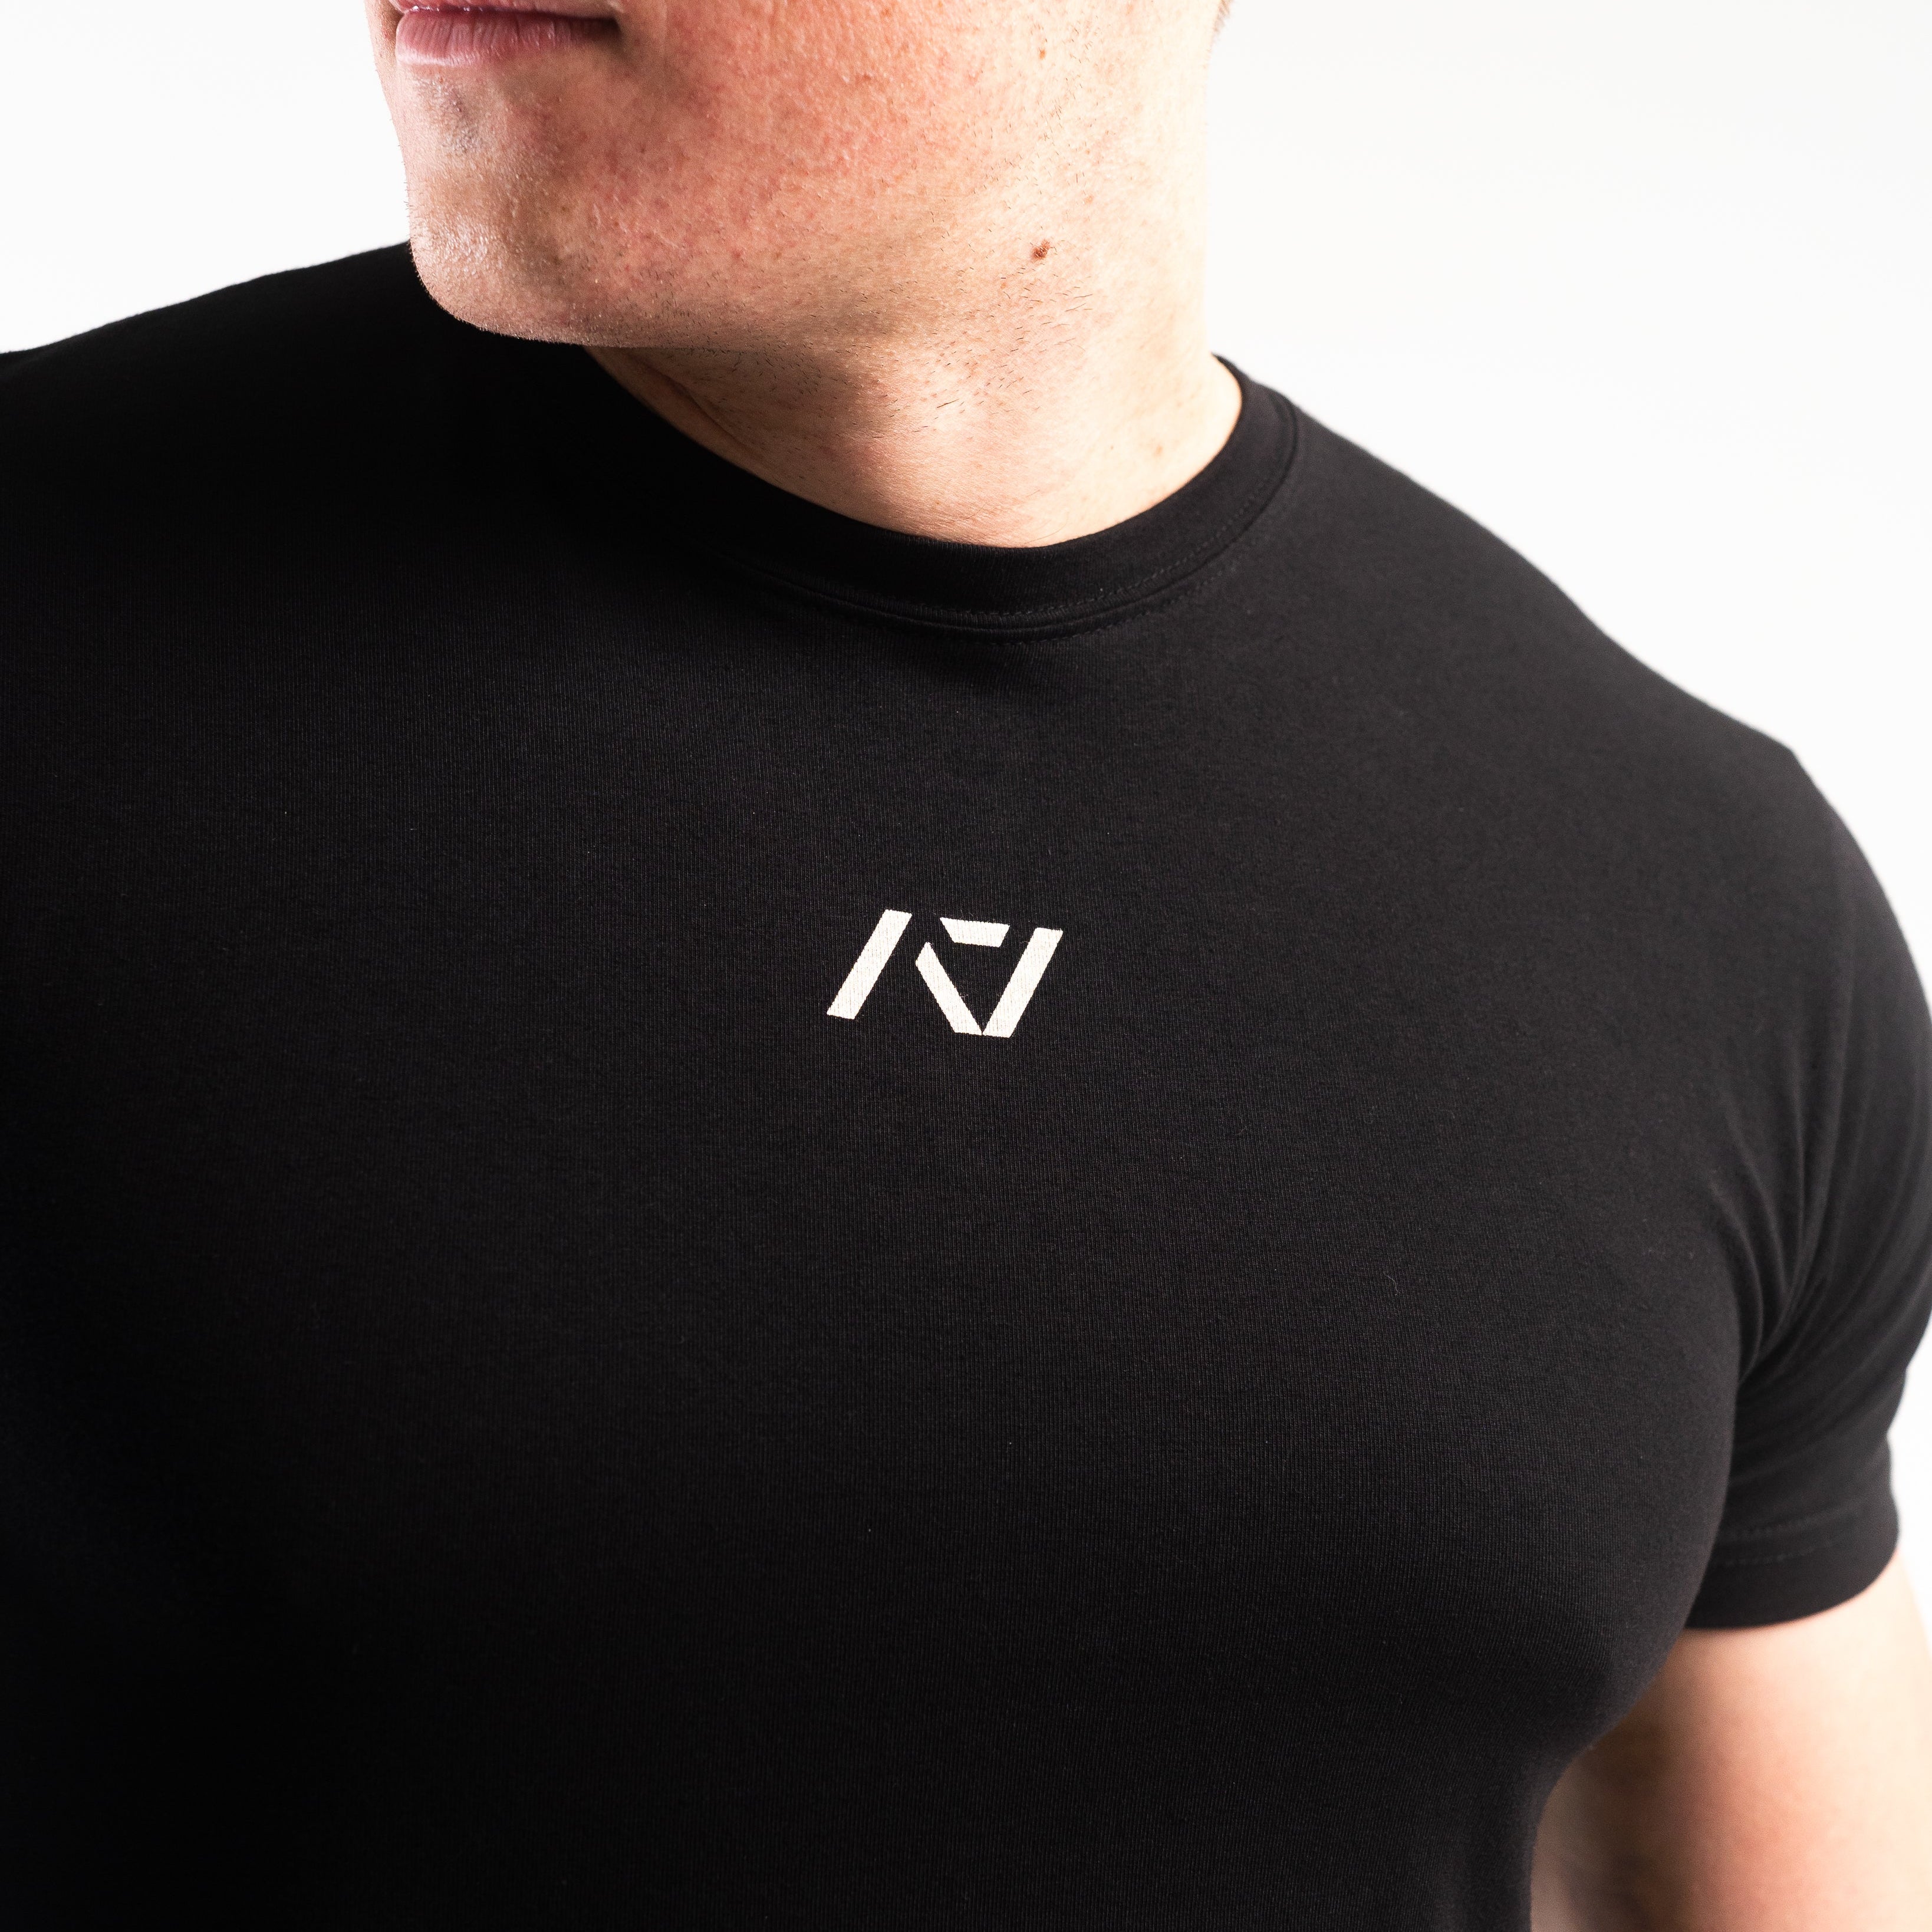 Stealth is our classic black on black shirt design. With the Stealth shirt you can be noticed, yet still, be able to be subtle. With the Stealth Bar Grip Shirt you can be noticed, yet still, be able to be subtle. The A7 silicone bar grip helps with slippery commercial benches and bars and anchors the barbell to your back. Genouillères powerlifting shipping to France, Spain, Ireland, Germany, Italy, Sweden and EU.